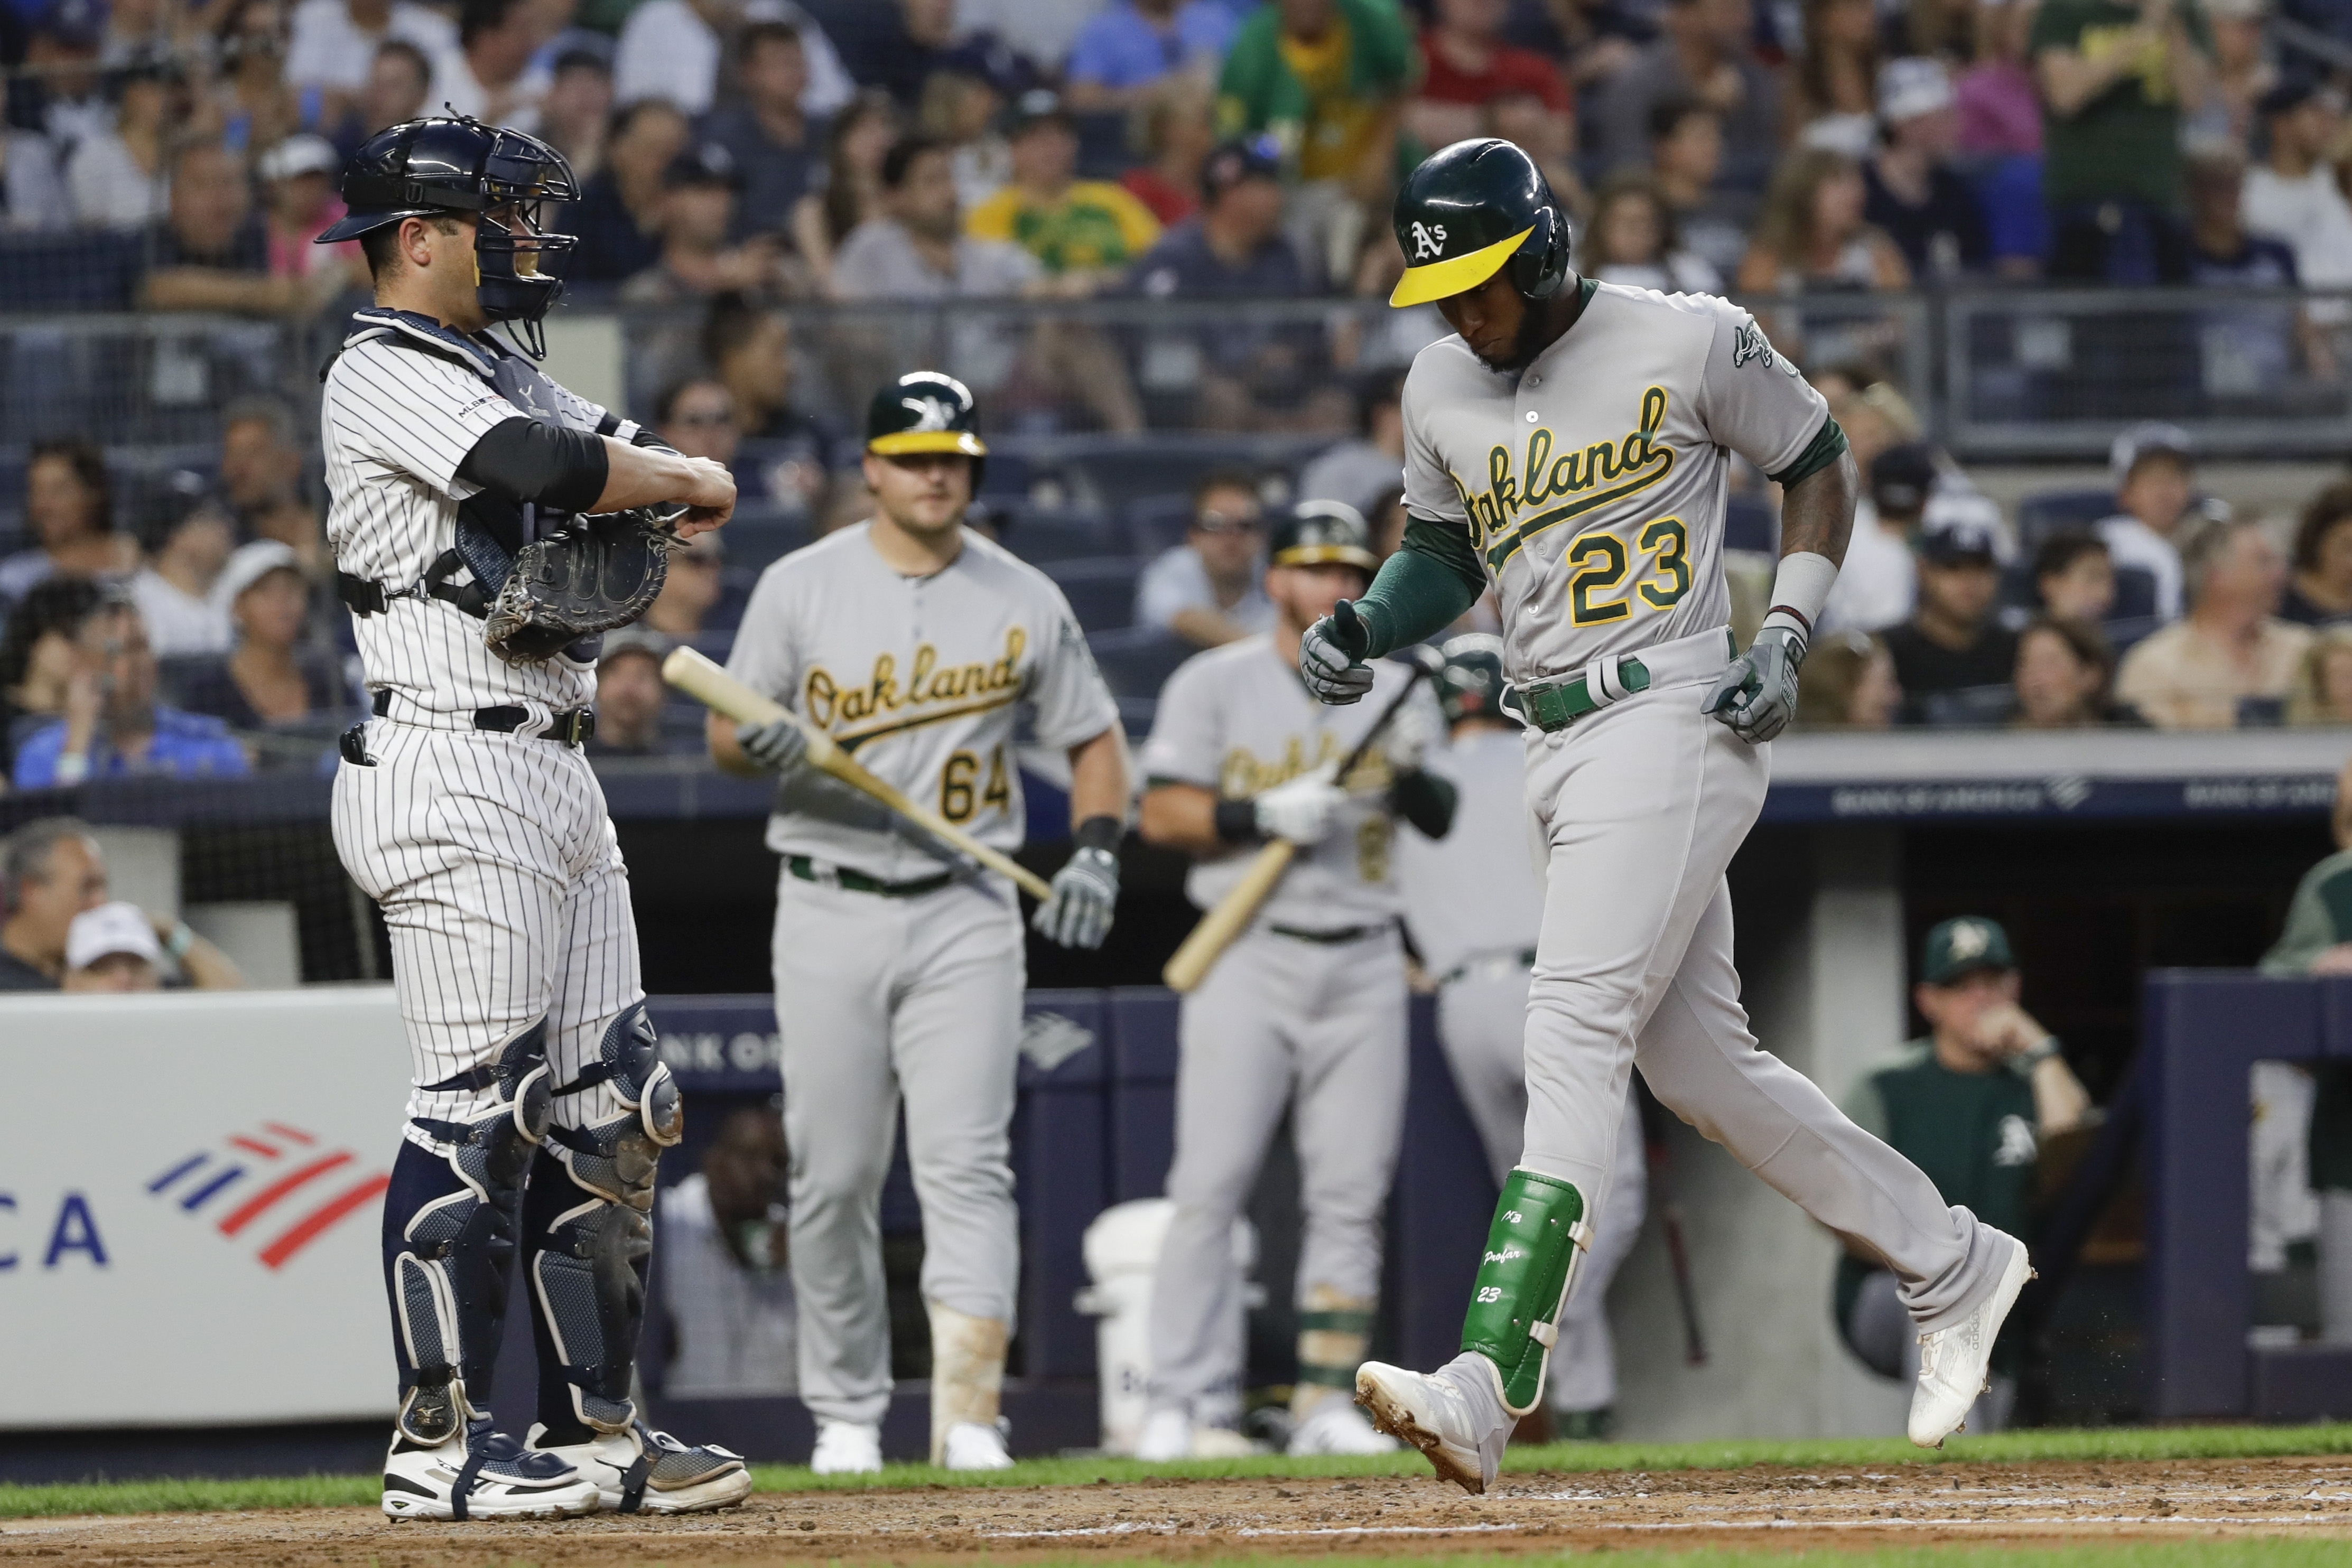 Profar leads Athletics to an 8-2 victory over the Yankees